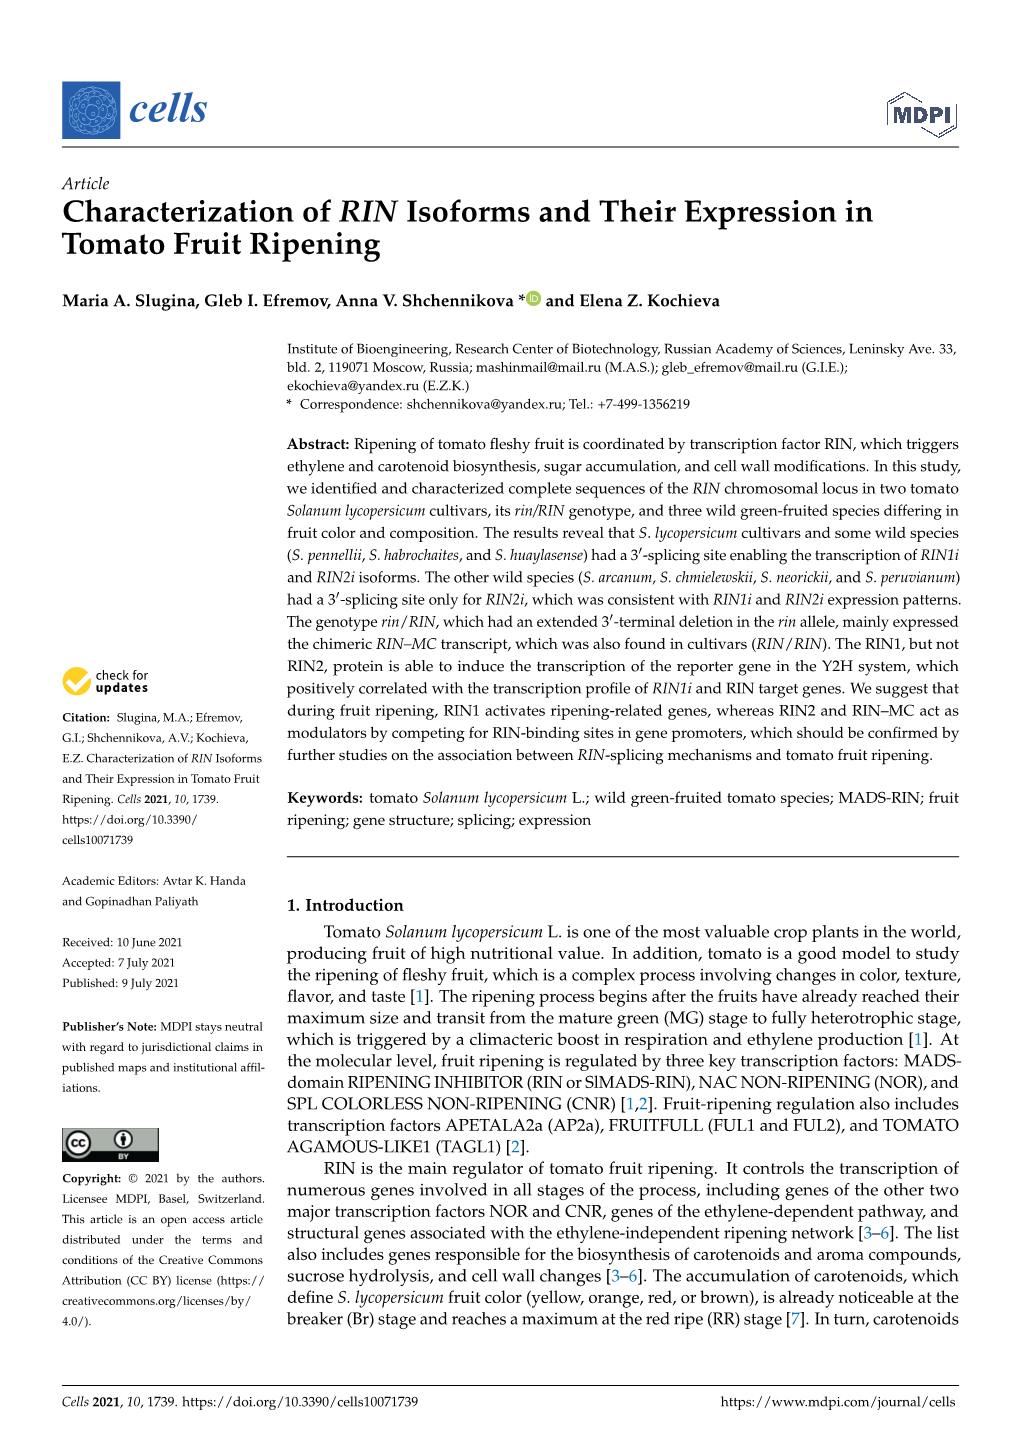 Characterization of RIN Isoforms and Their Expression in Tomato Fruit Ripening